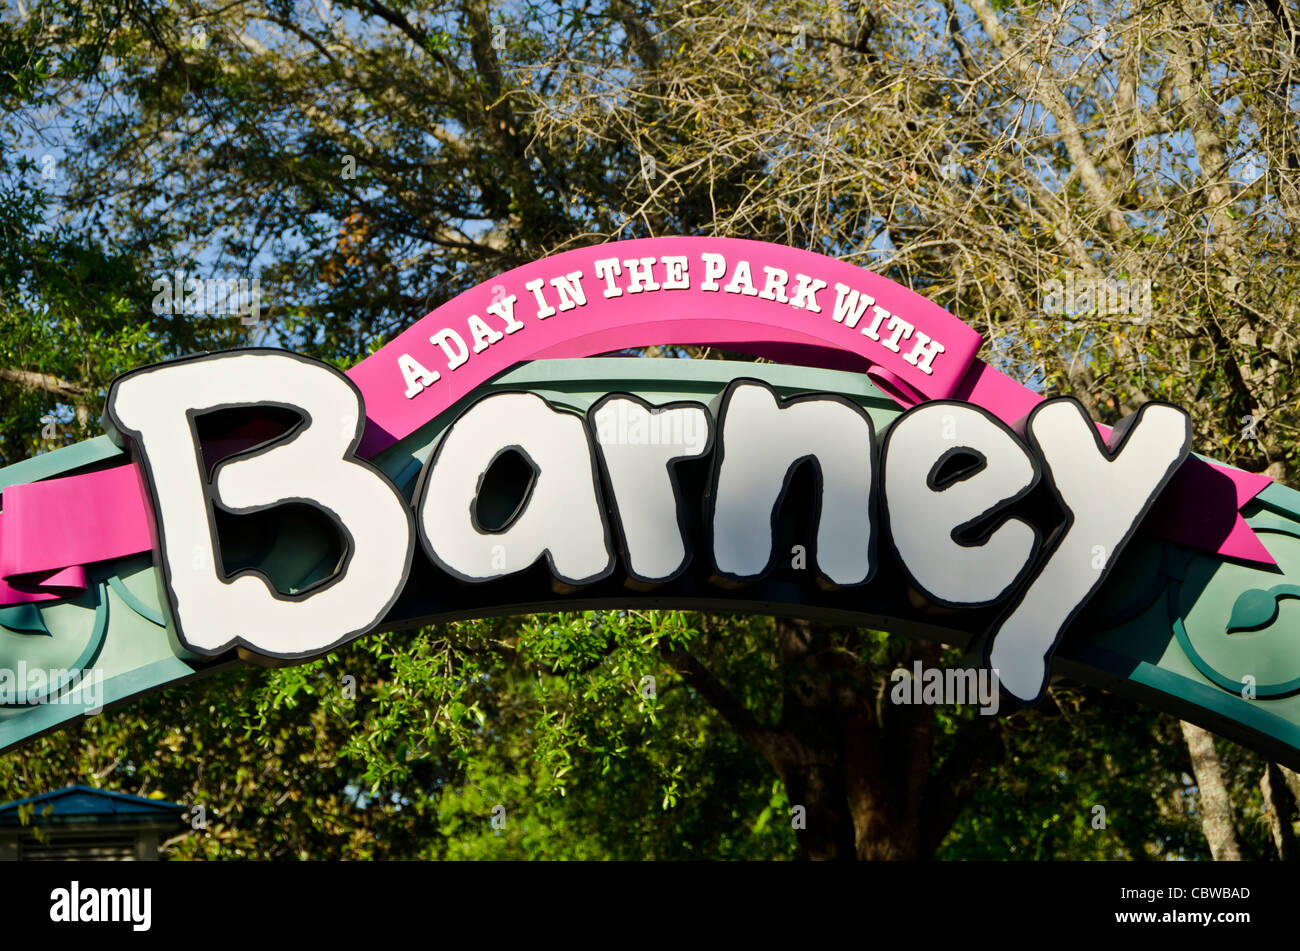 A Day in the Park With Barney kids attraction sign at Universal Studios Orlando Florida Stock Photo